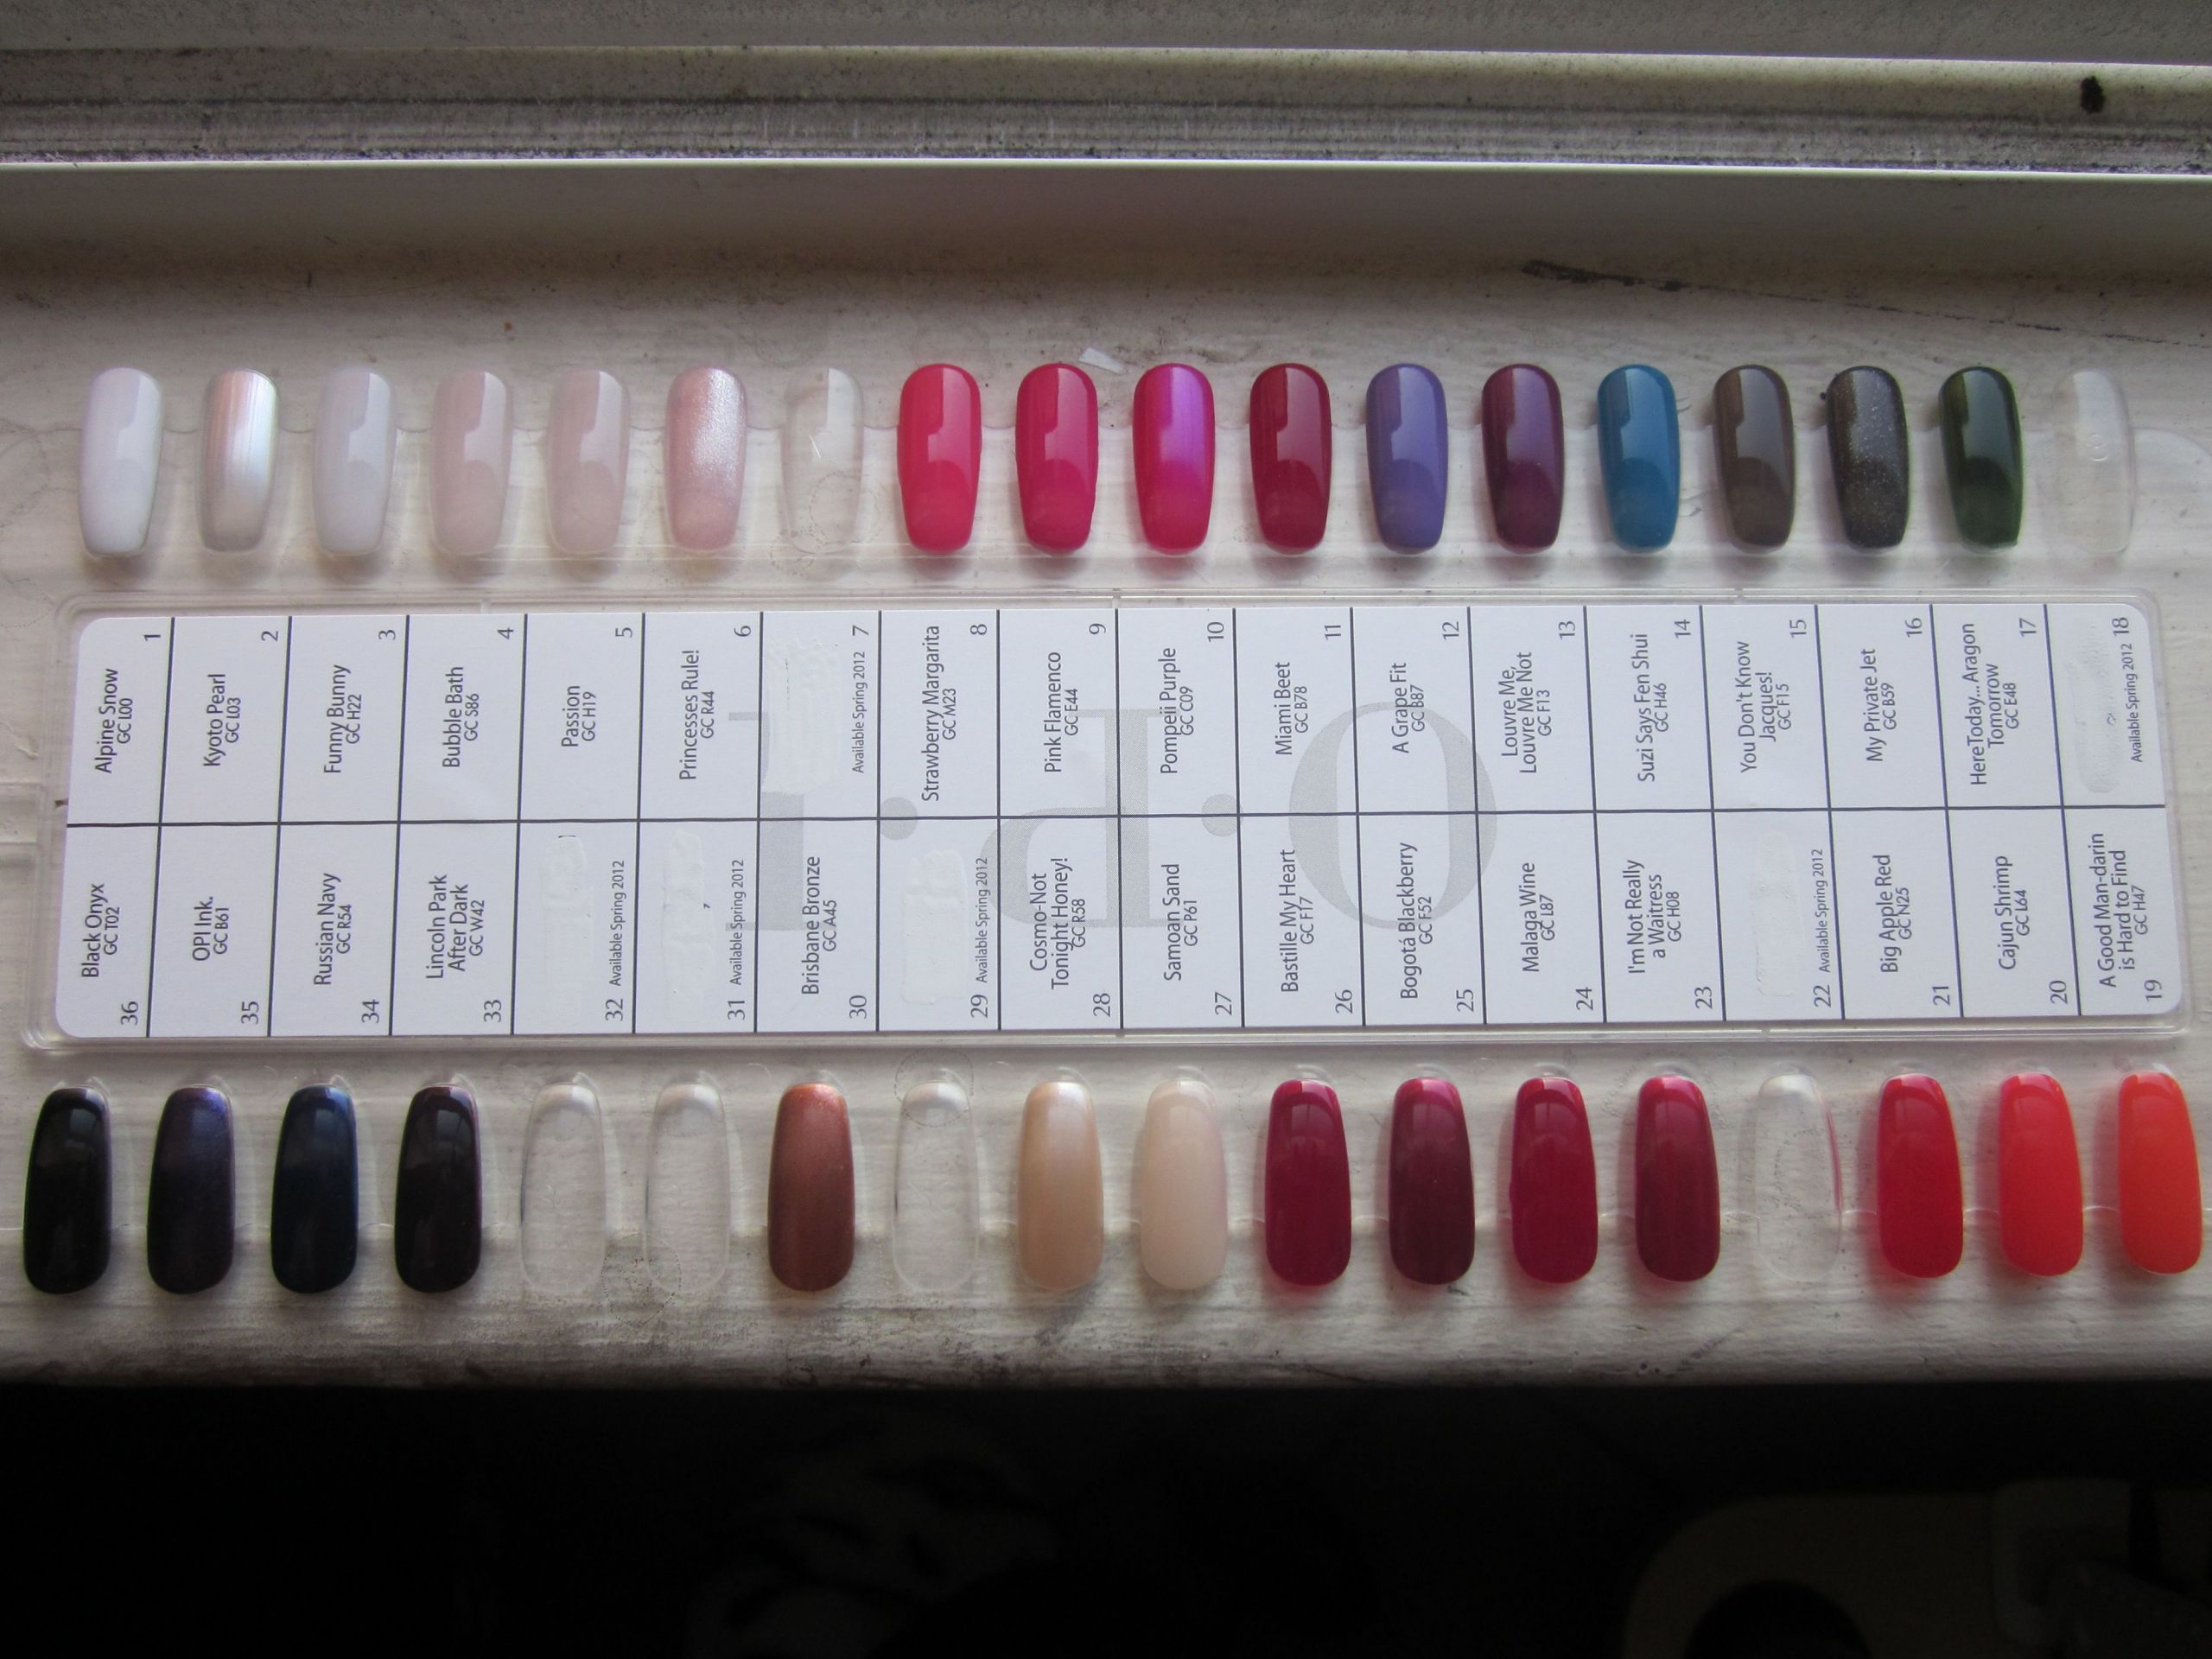 The Best Opi Gel Nail Colors Chart Home, Family, Style and Art Ideas